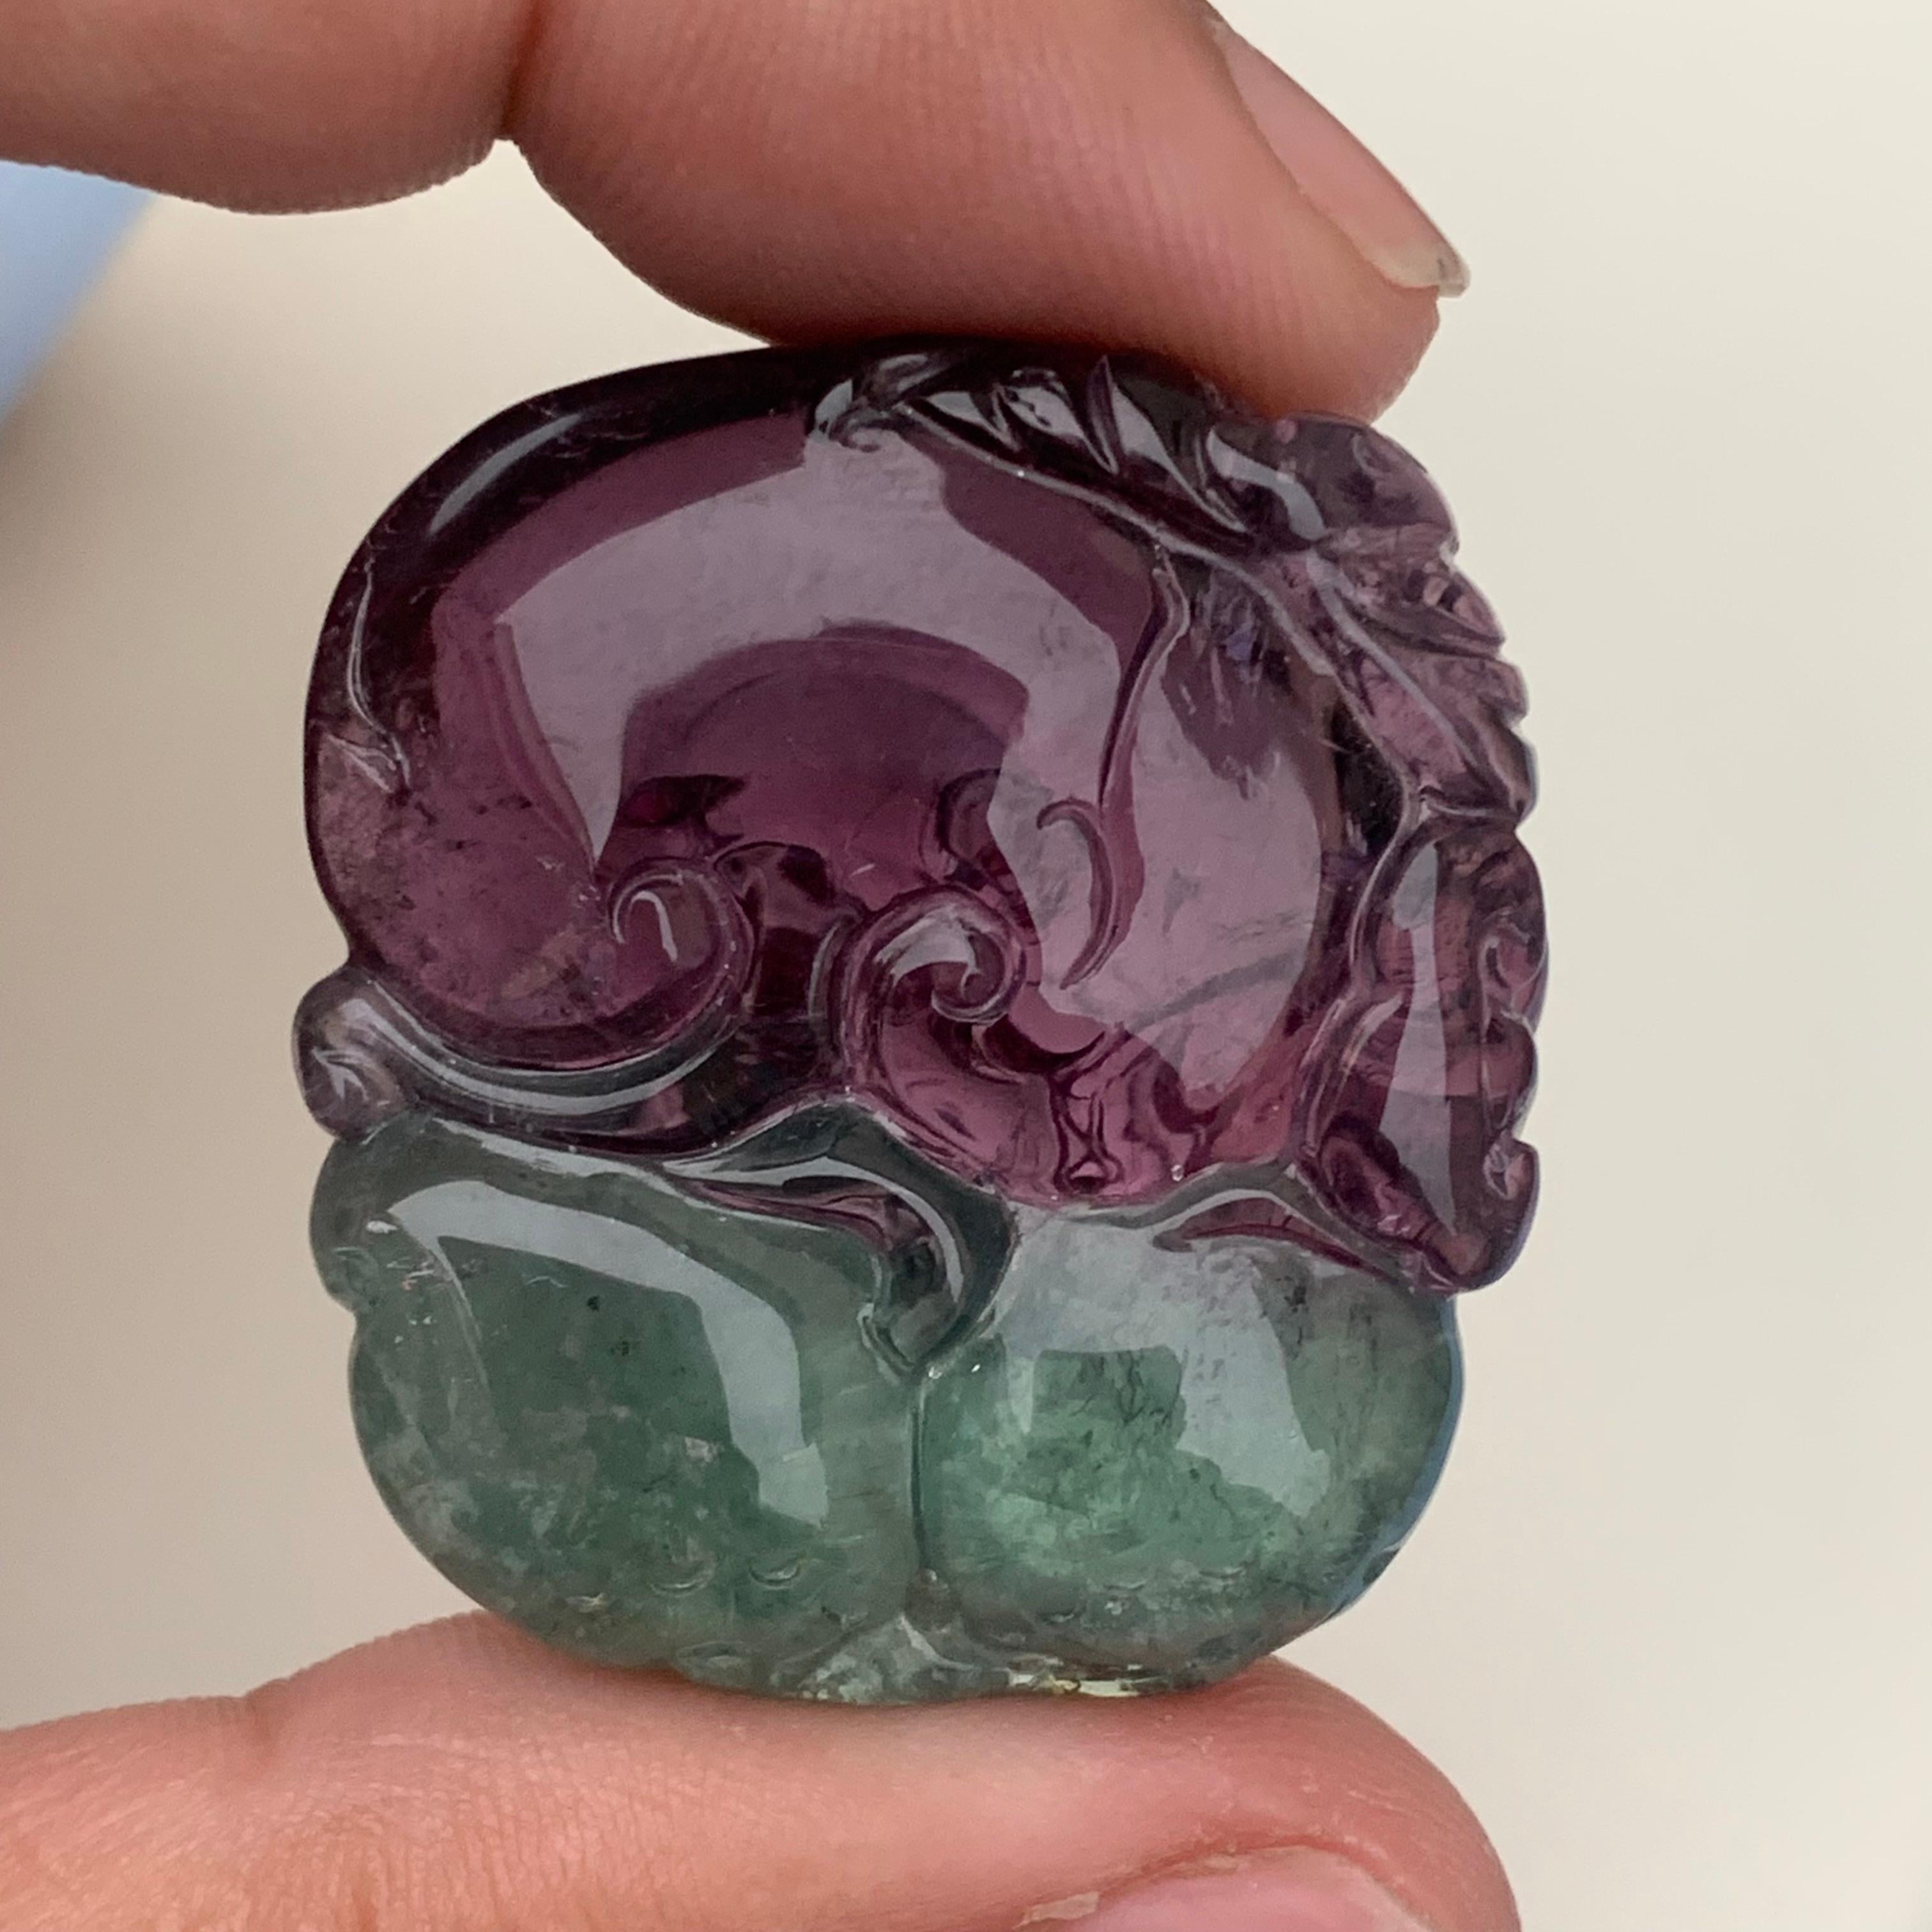 Bicolor Tourmaline Carved
Weight: 107.65 Carats
Dimension:33x30x10.2 Mm
Origin: Africa
Color: Red & Green
Shape: Carving
Quality: AAA
.
Bicolor tourmaline is connected to the heart chakra, which makes it good for cleansing and removing any